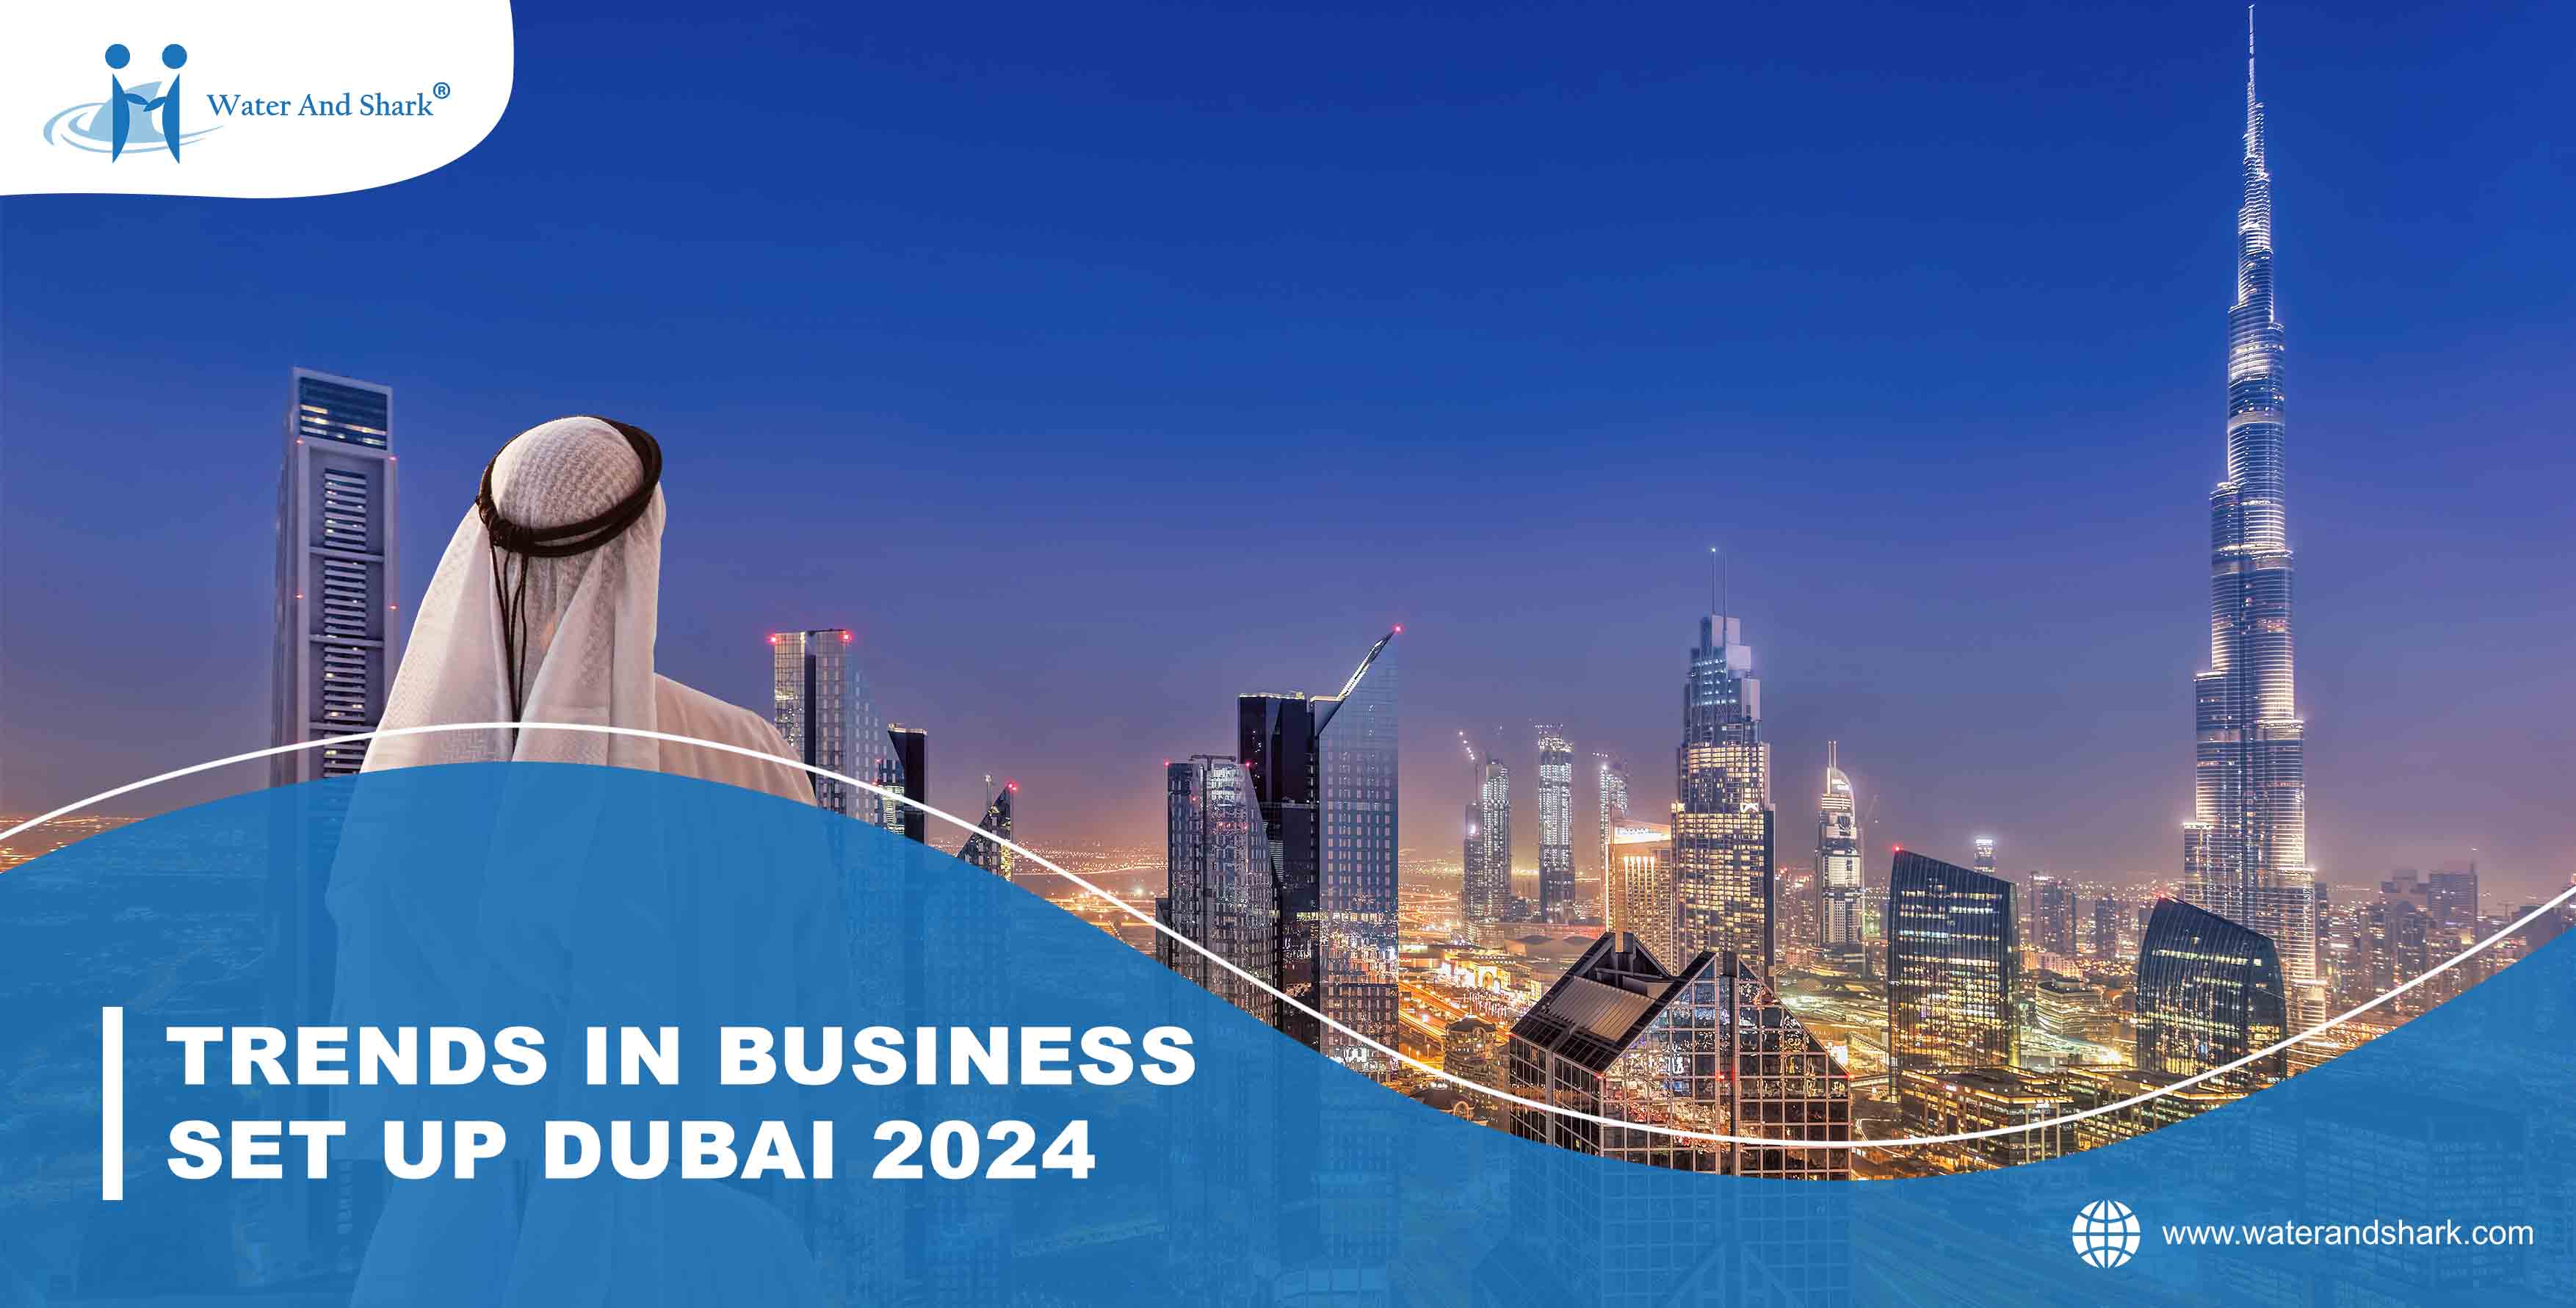 650x1280_TRENDS_IN_BUSINESS_SET_UP_DUBAI_2024_low_size.jpg